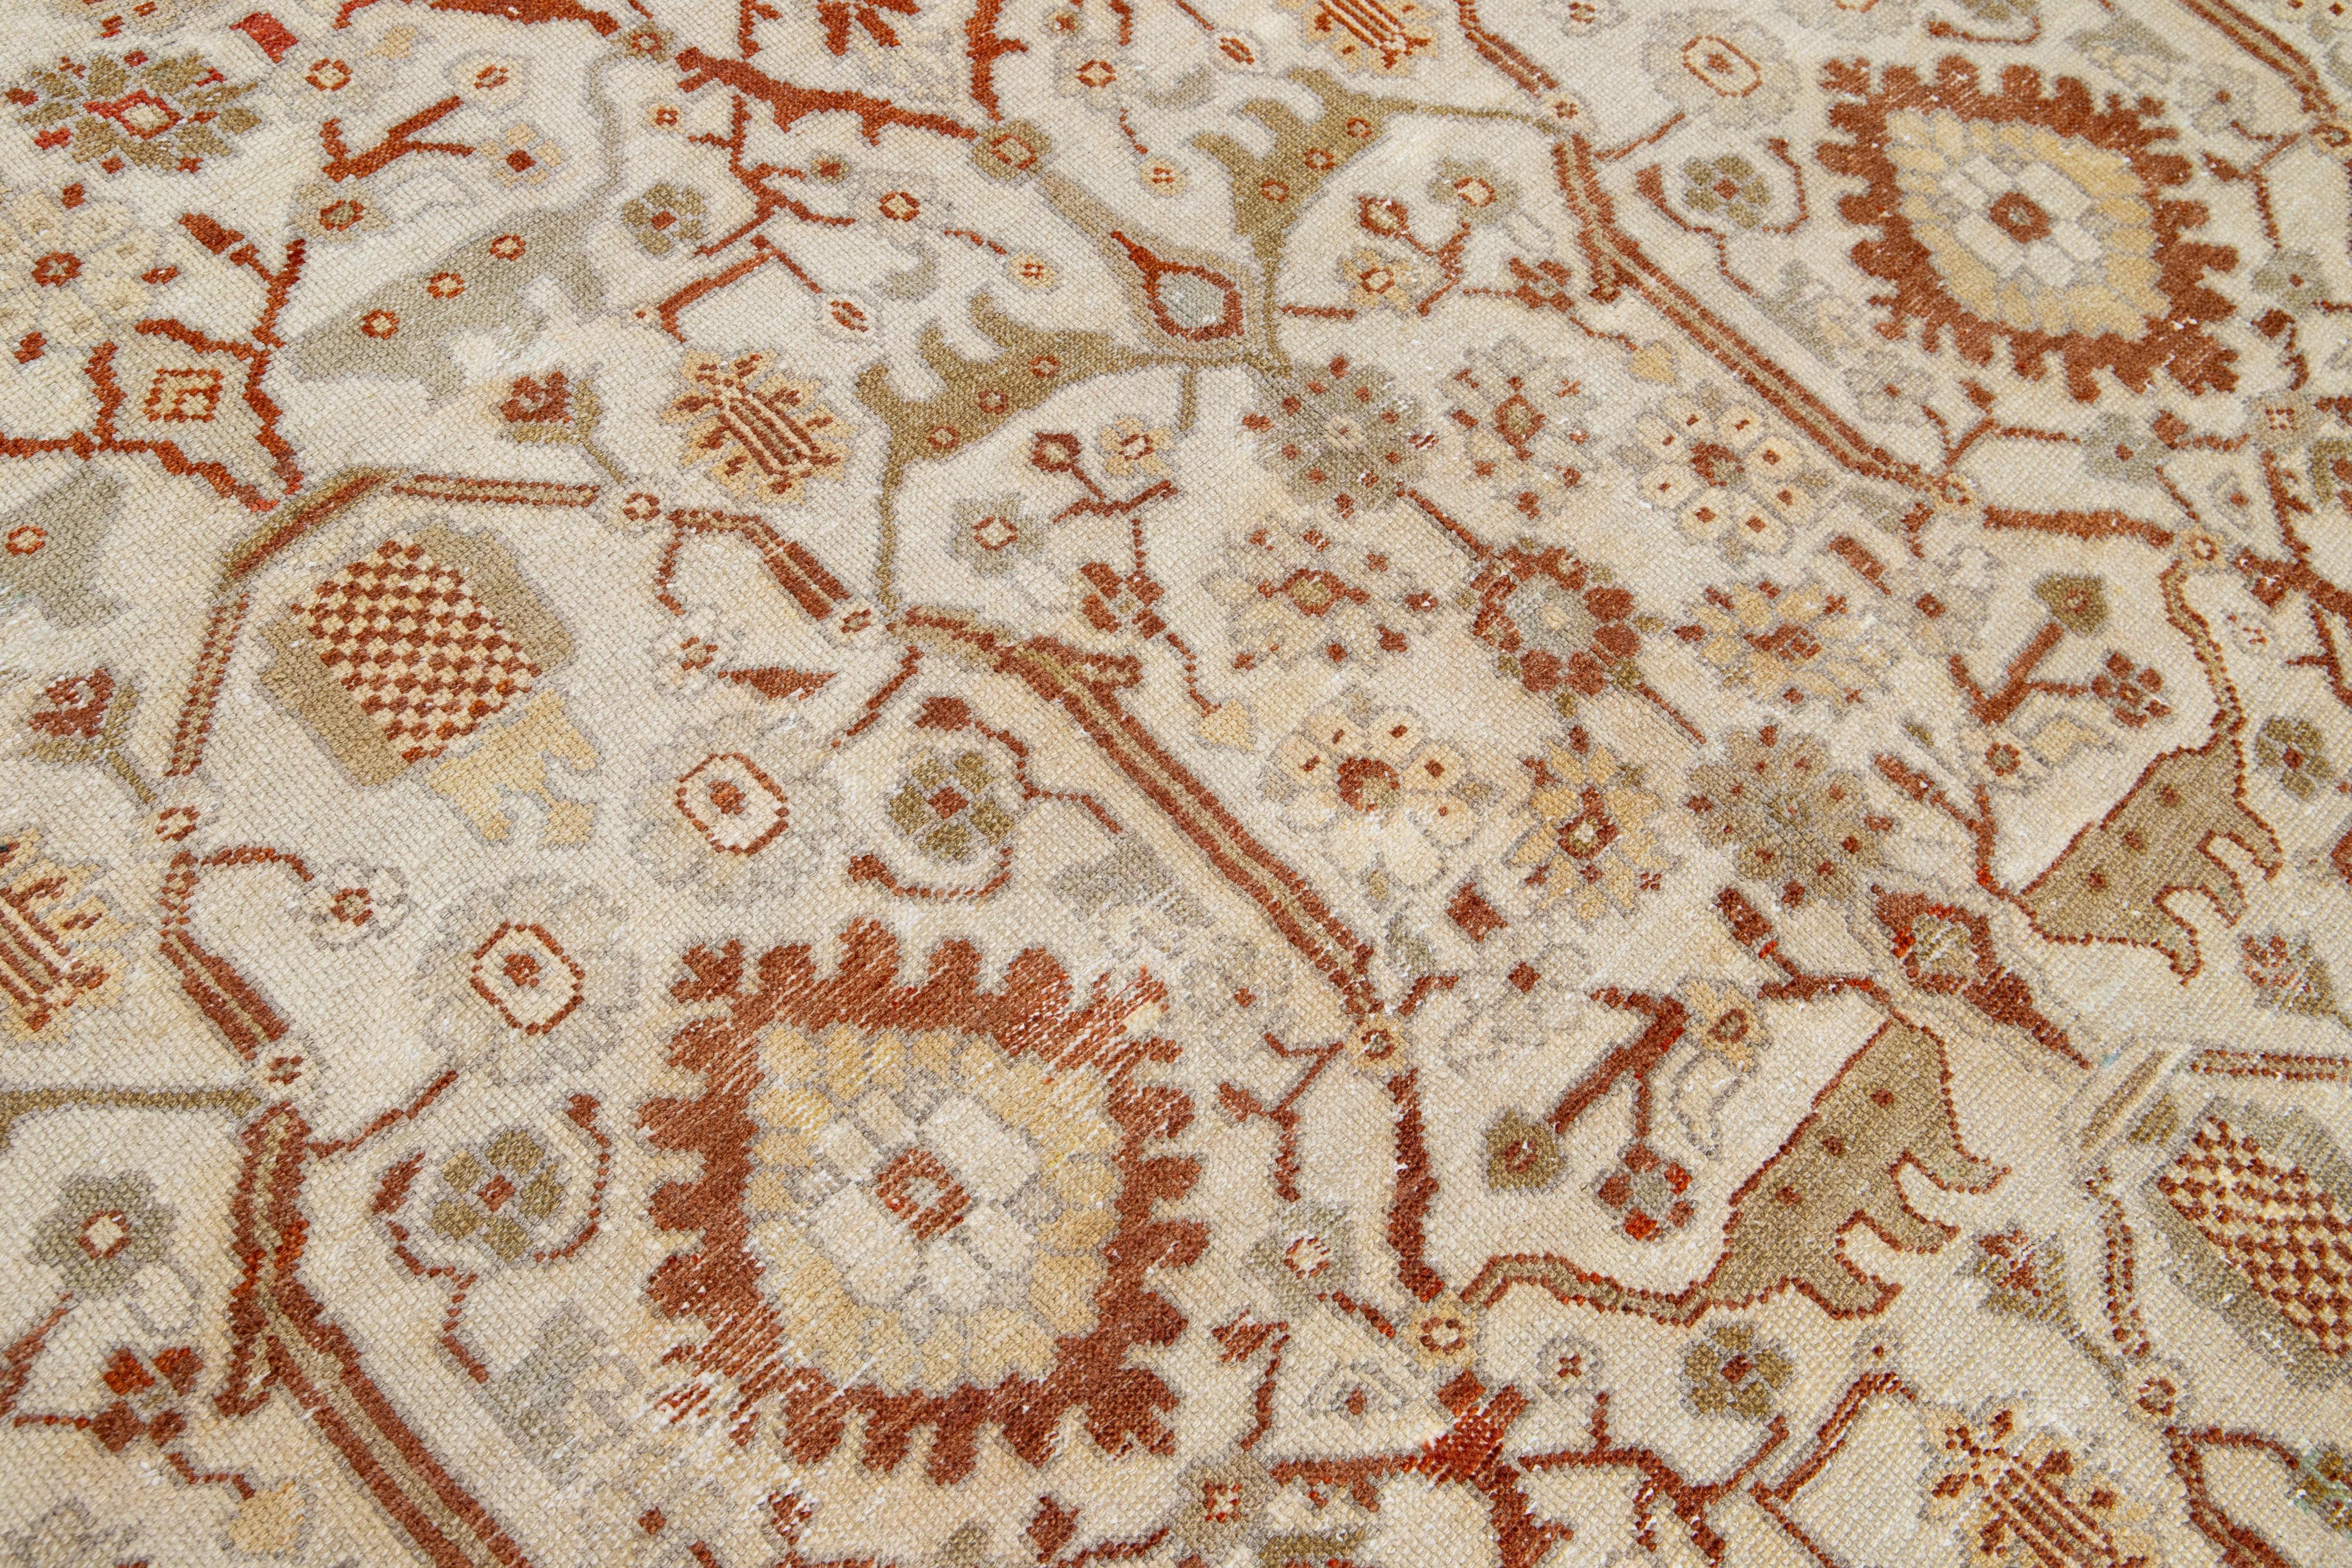 1900s Sultanabad Persian Gallery Wool Rug In Beige and Orange With Floral Motif For Sale 1